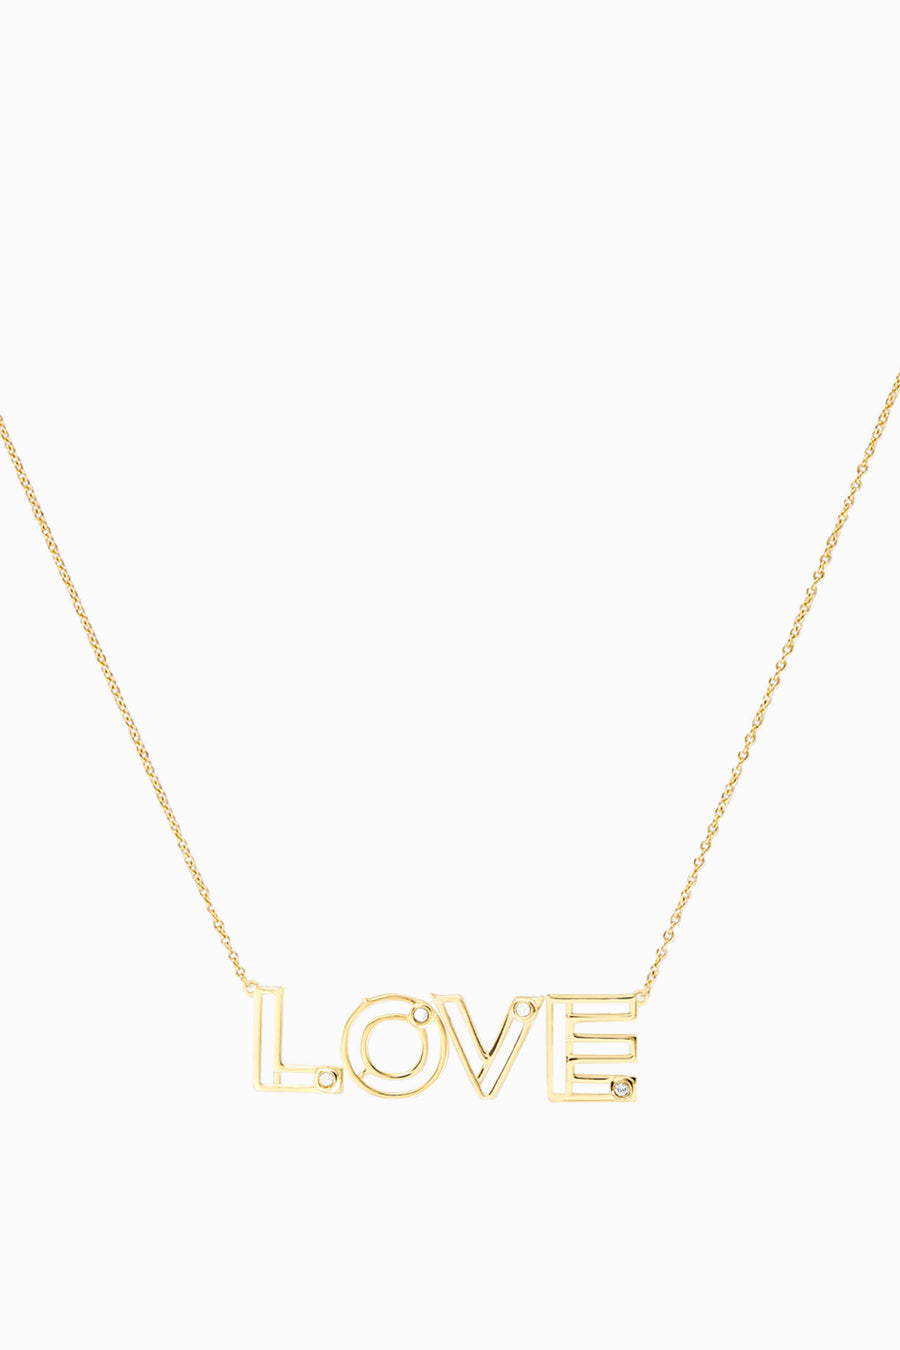 Shop Jewelry - Gold Paper Clip Chain with Diamond Letter Necklace l MCHARMS